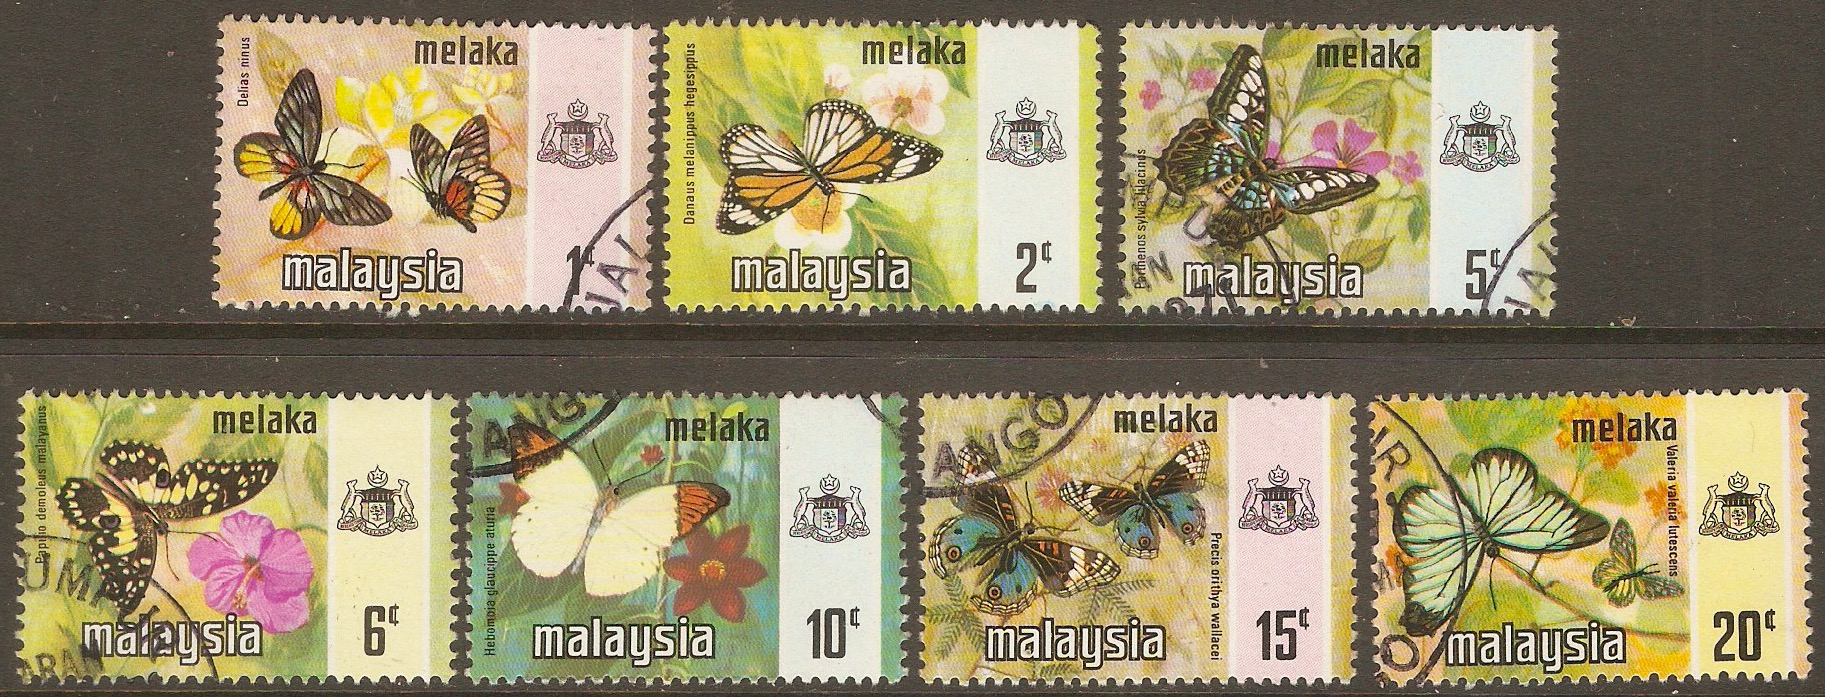 Malacca 1971 Butterfly set. SG70-SG76.